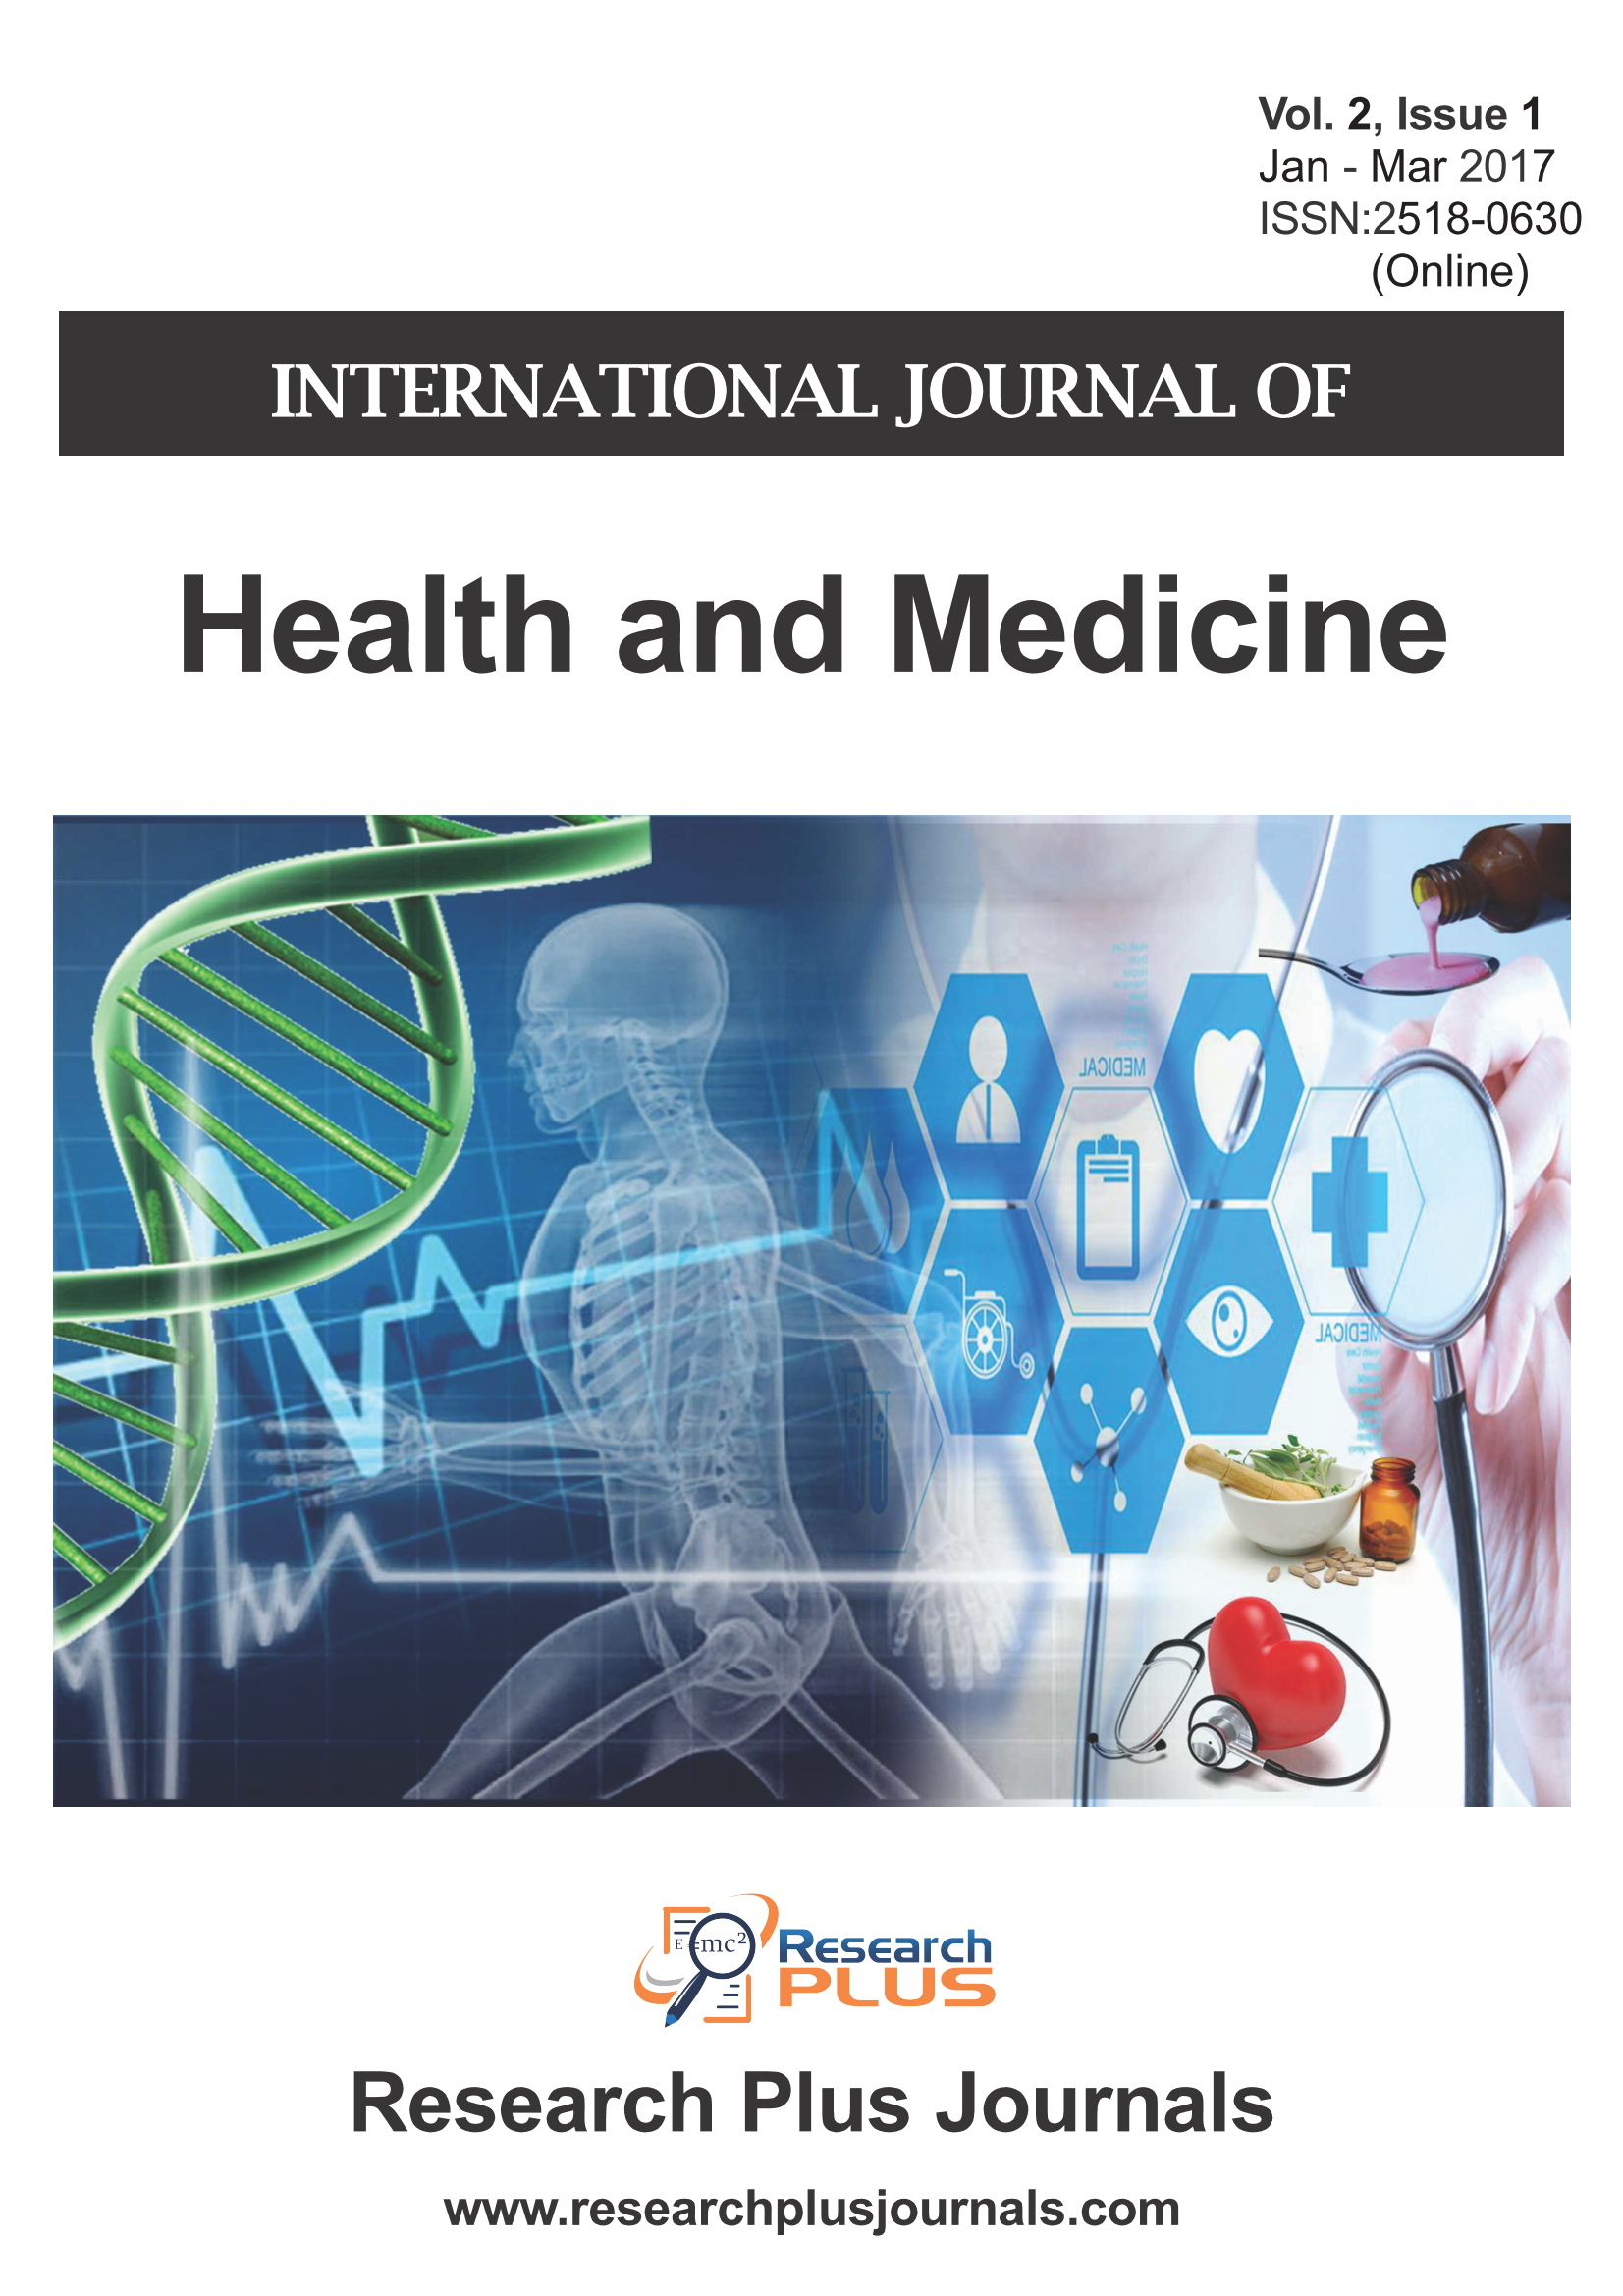 International Journal of Health and Medicine (ISSN Online: 2518-0630)